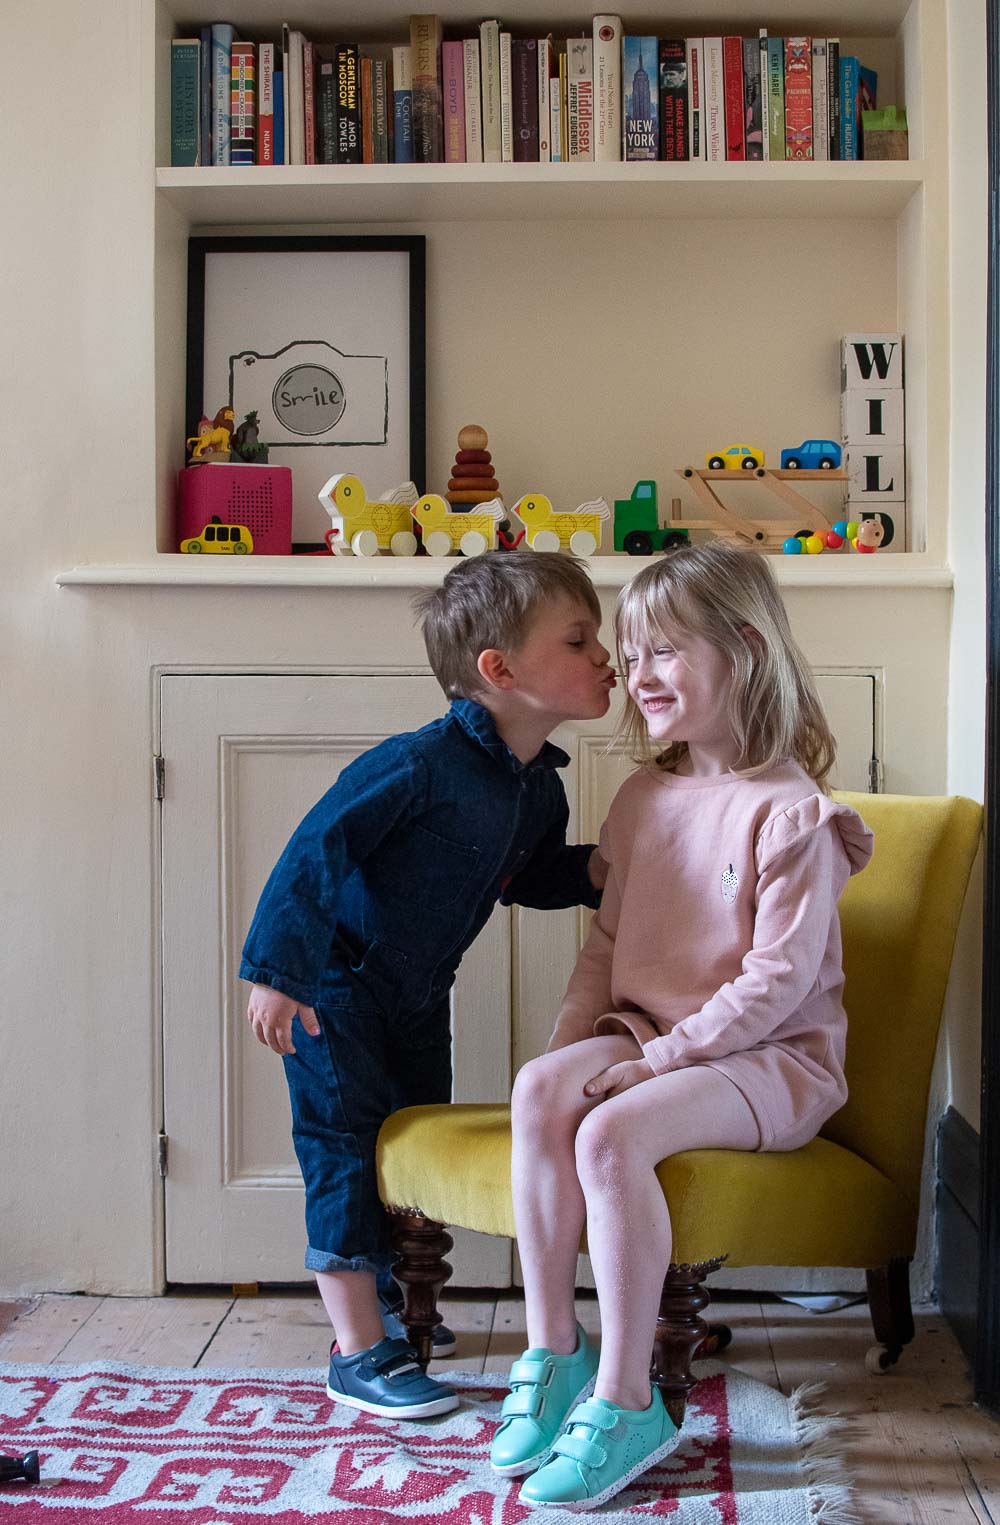 Perfectly behaved children in our tidy playroom, this is a photo not real life